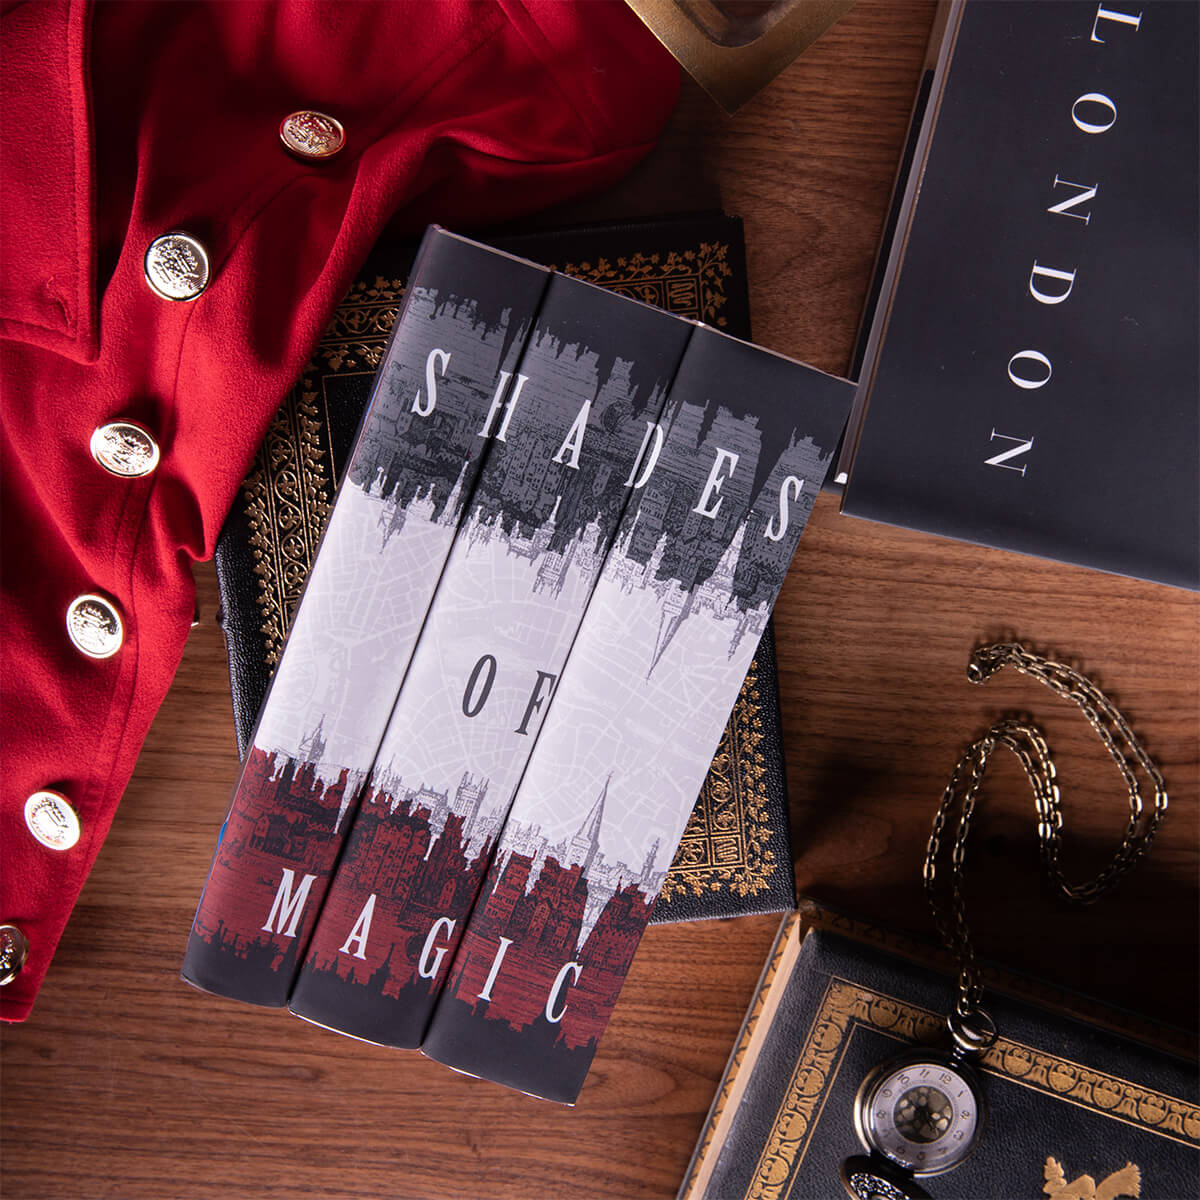 Flat lay of Shades of Magic set from Juniper Custom. Set sits on antique leather books surrounded by a red coat, book on London, and a pocket watch set against wood background.